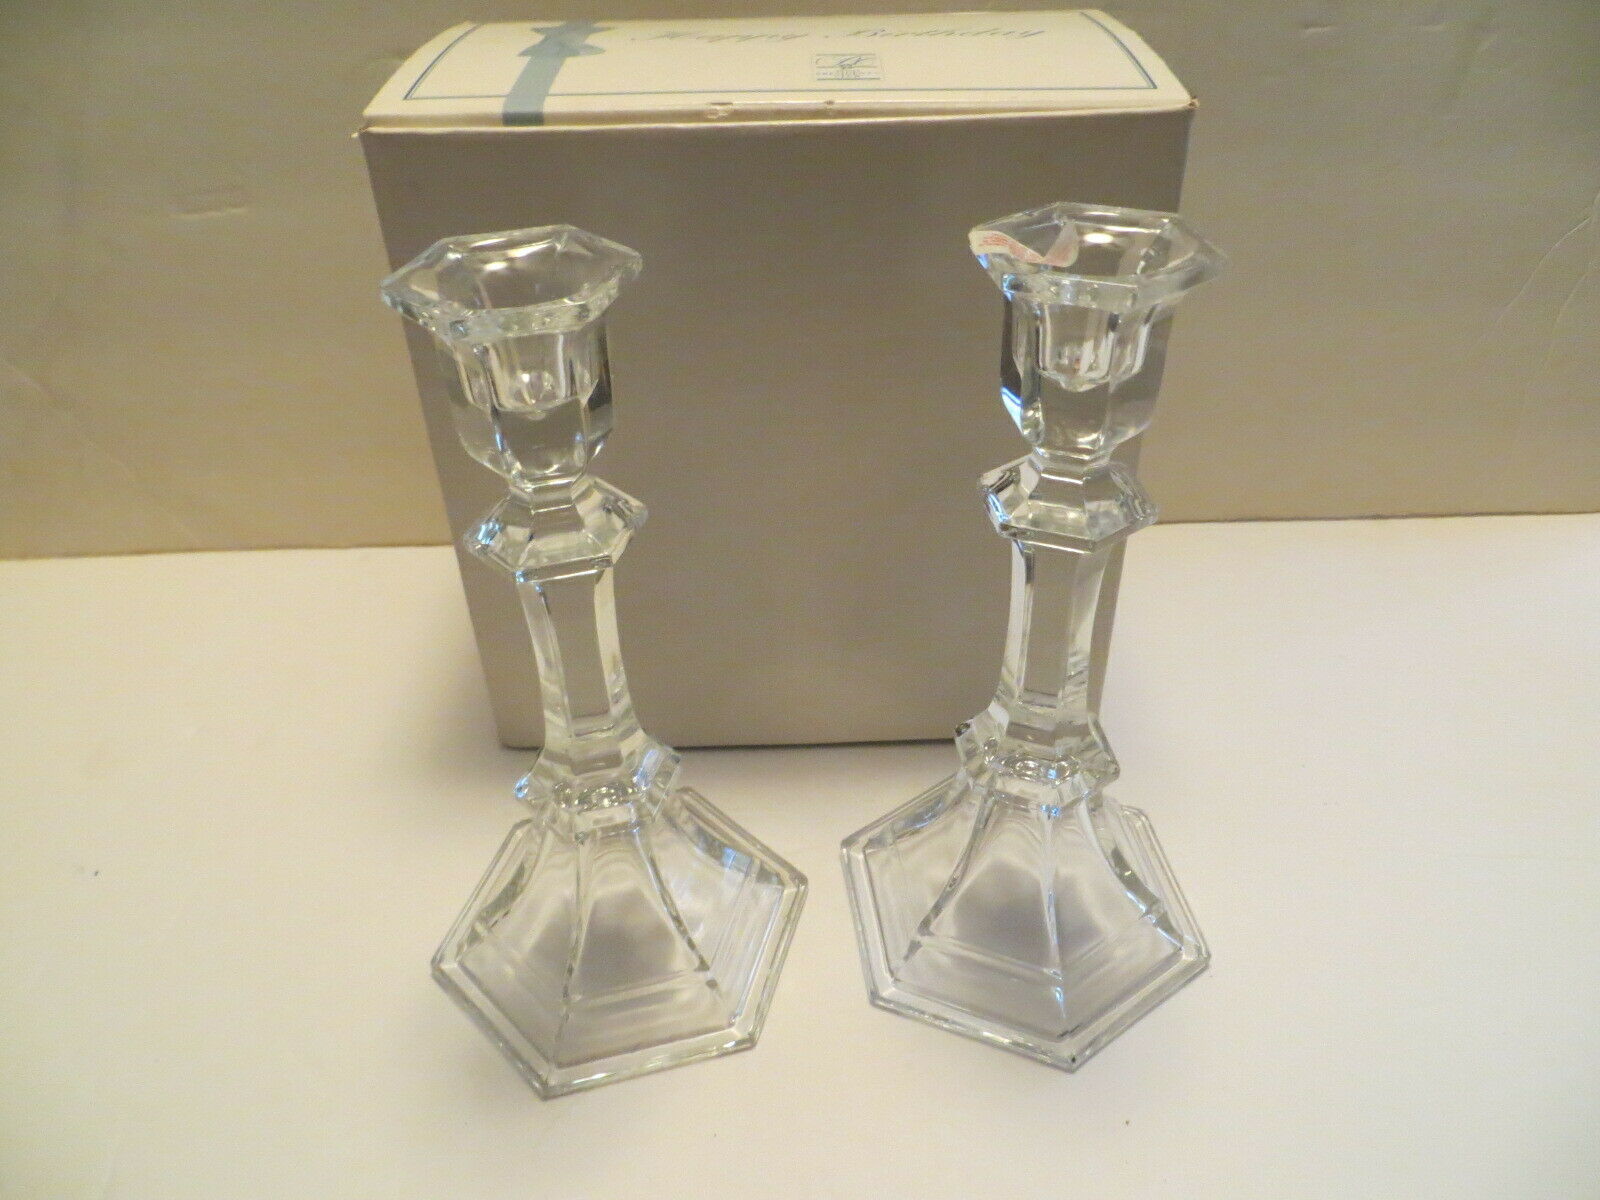 Primary image for Avon President's Club Happy Birthday Candle Holders, 24% Full Lead Crystal, Set 